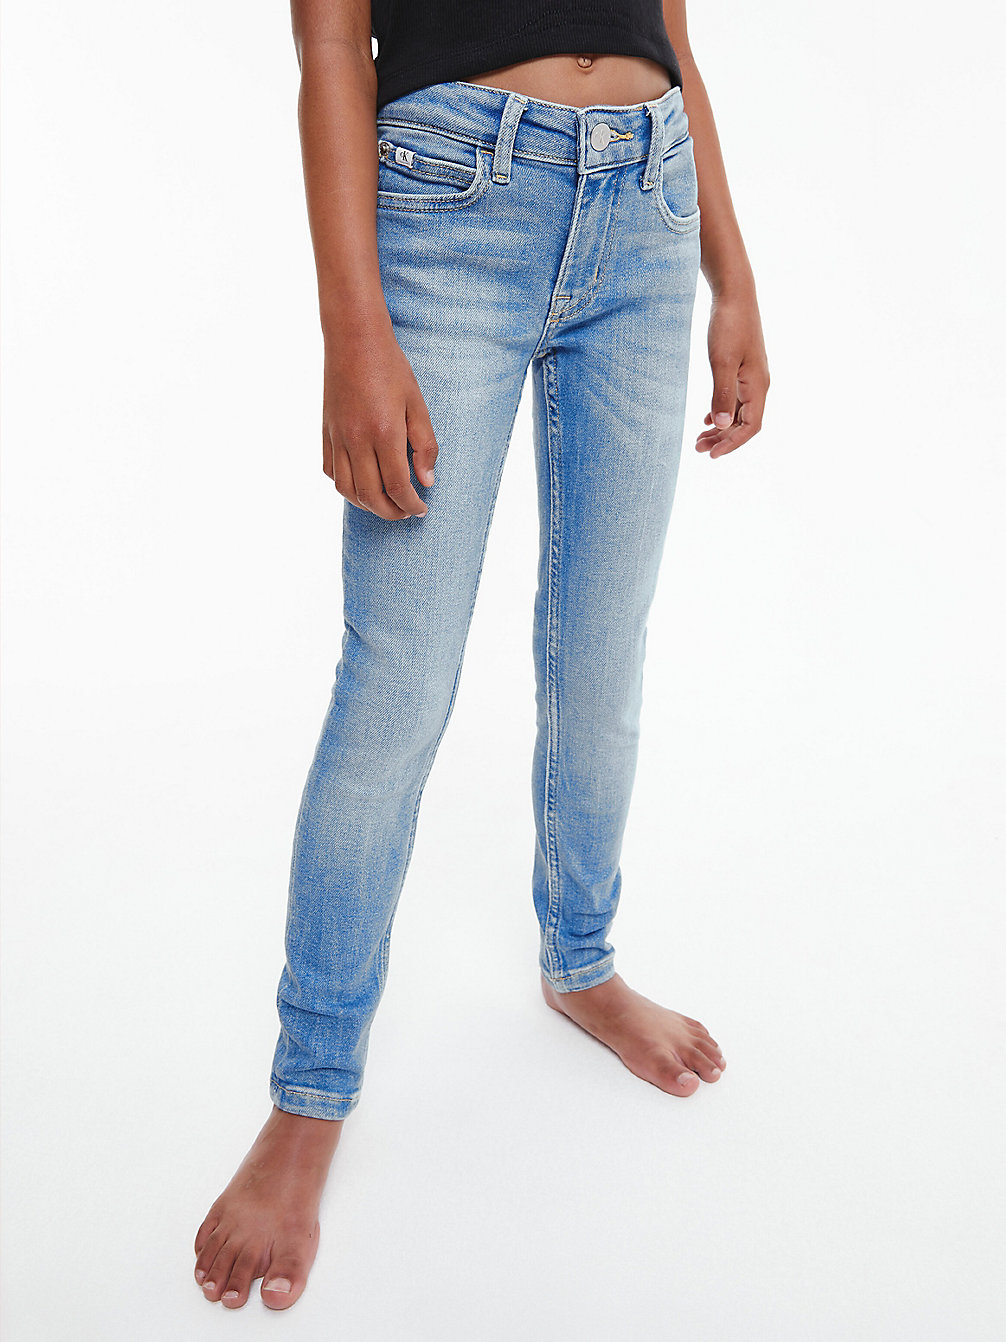 MID BLUE Mid Rise Skinny Jeans undefined girls Calvin Klein